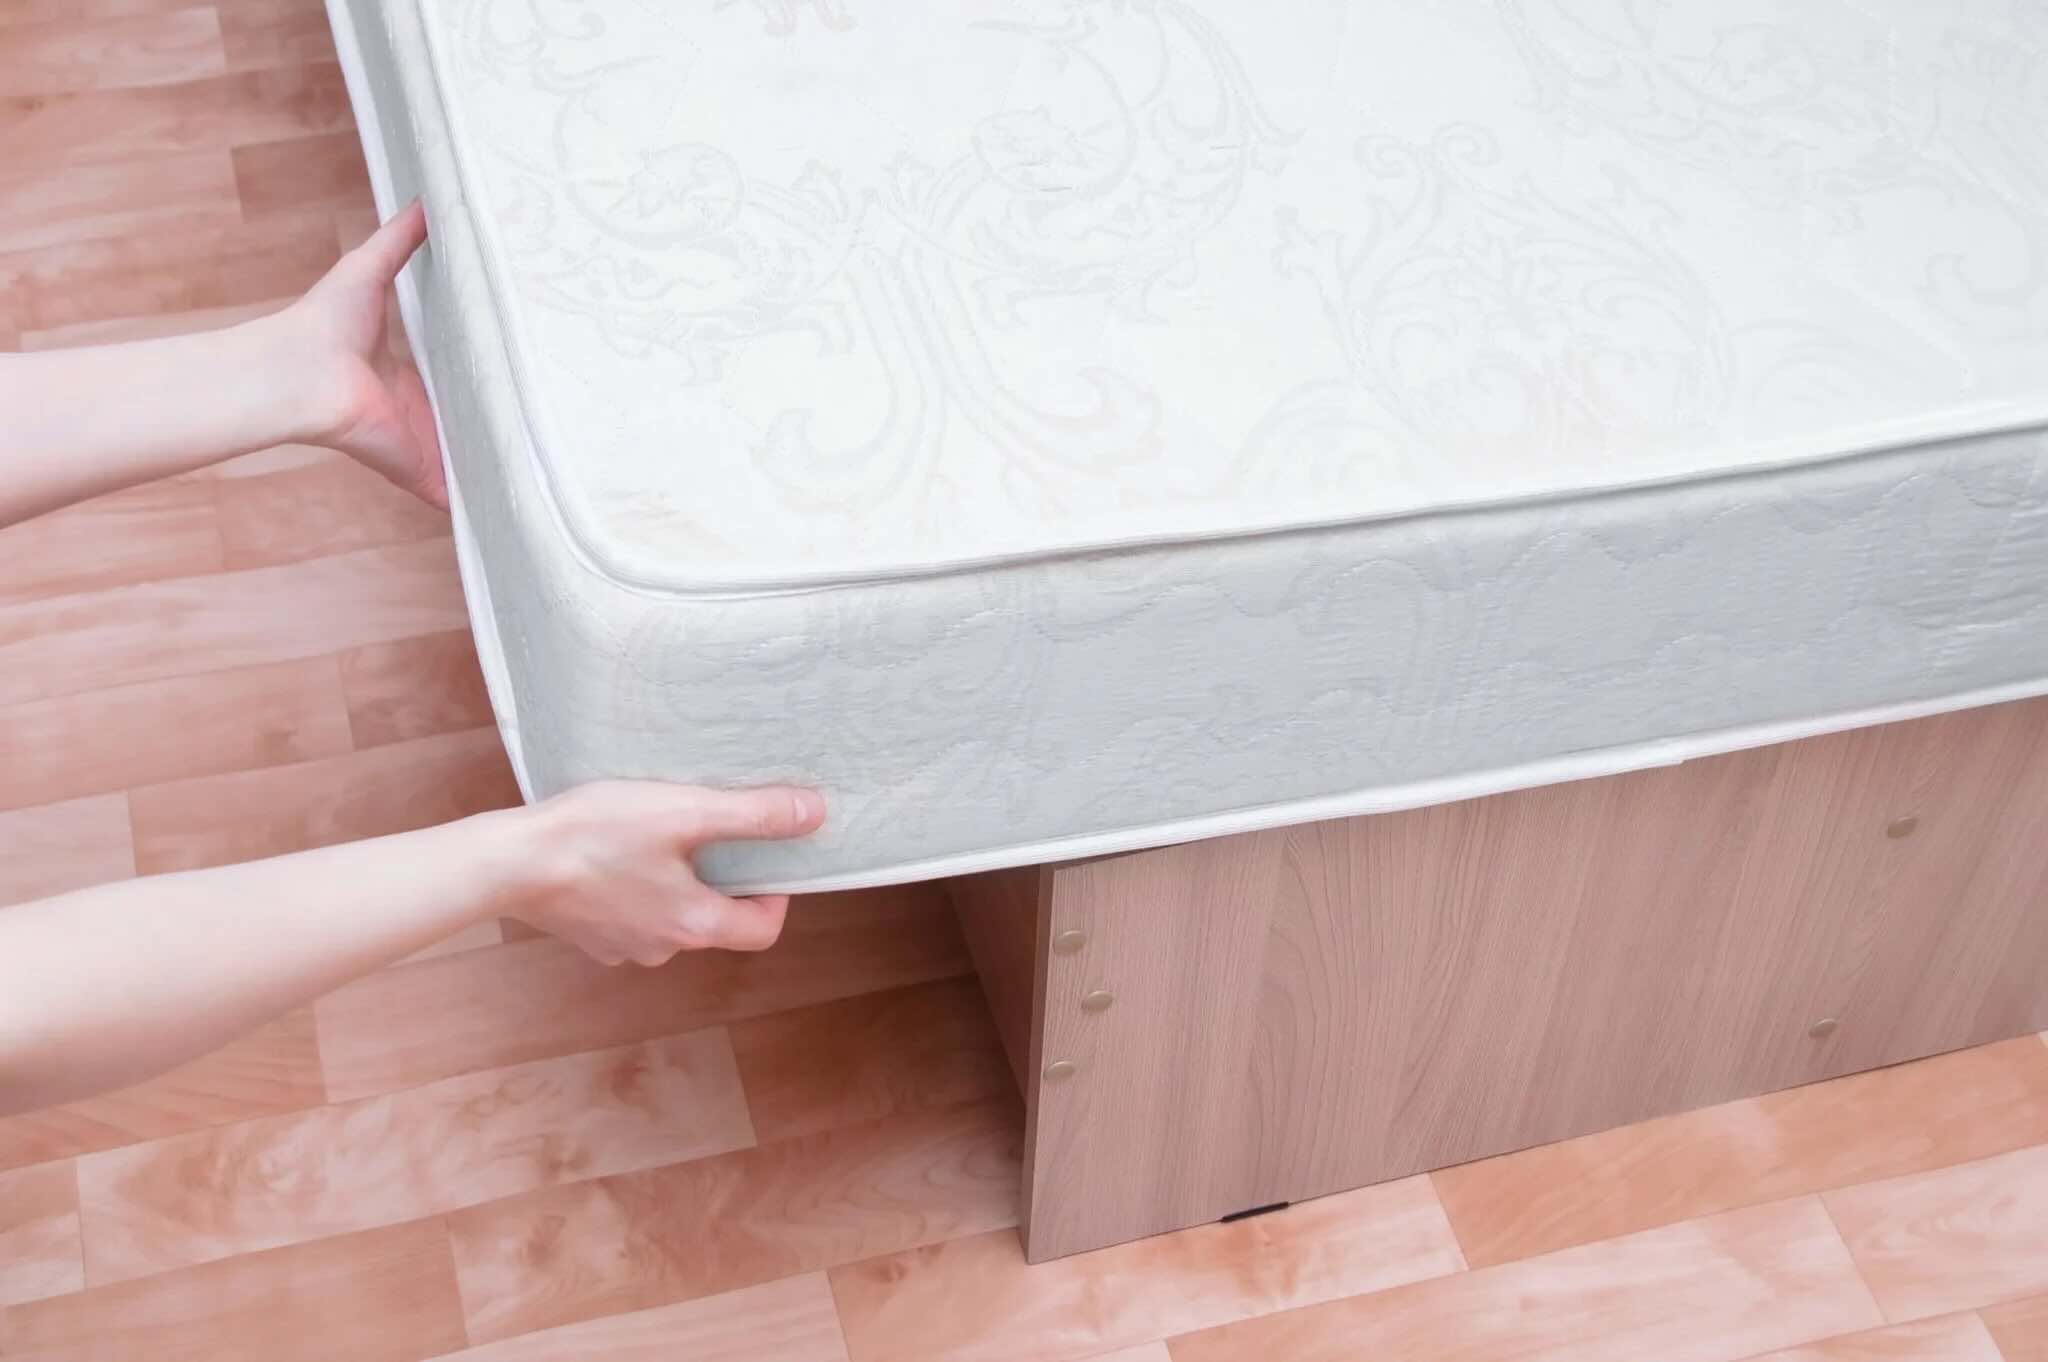 How To Prevent A Mattress From Sliding On A Bed Frame